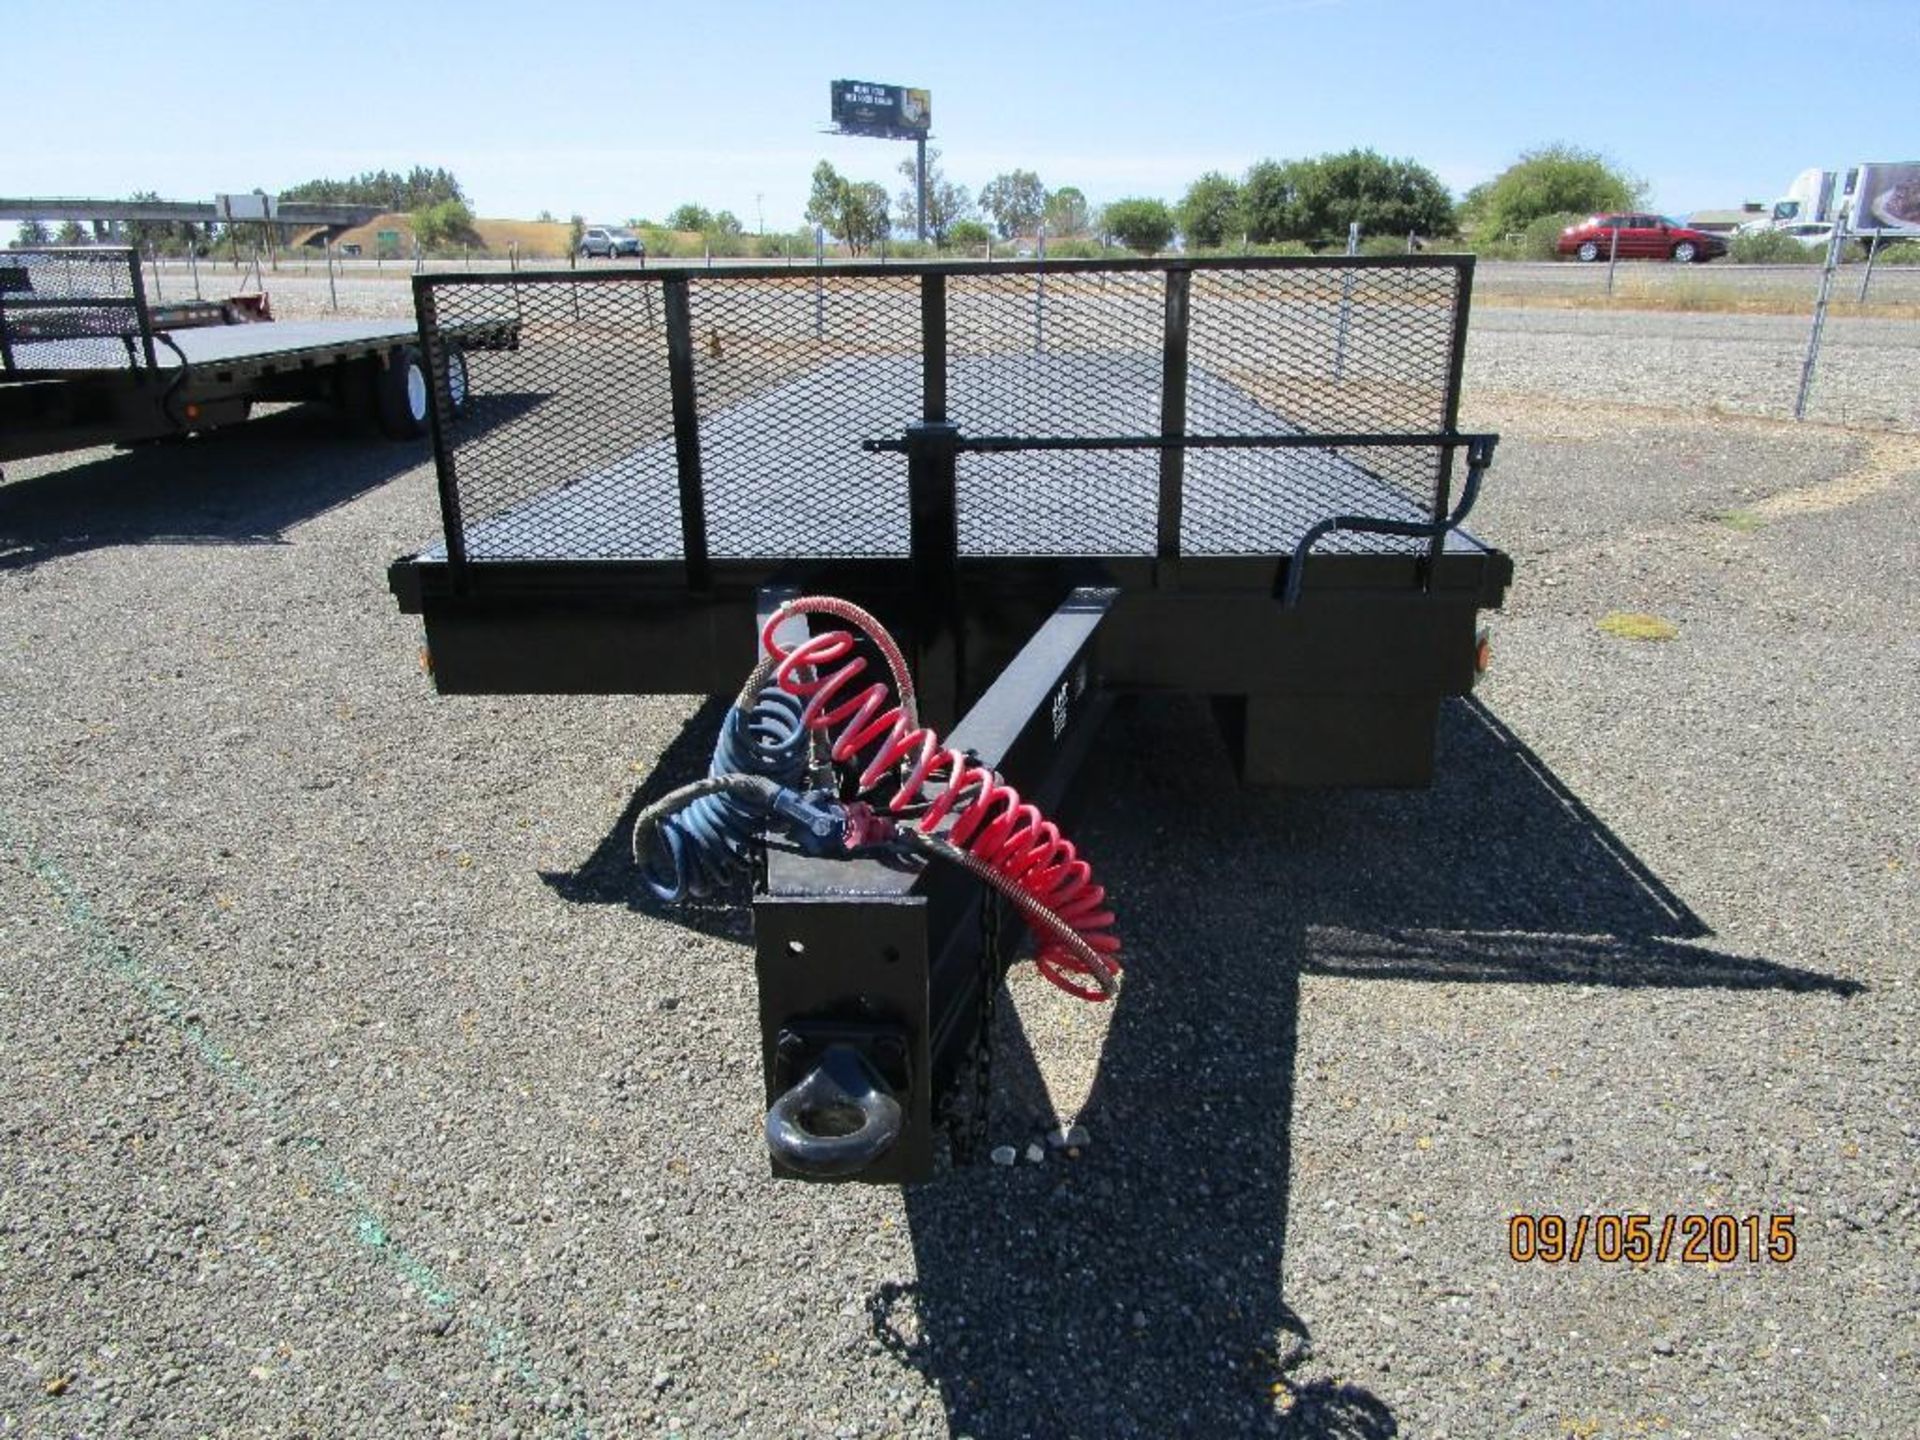 24'x102" Flatbed Trailer  VIN# 1B9H24201B1031523  Plate# 4FD9526  GVWR - 24,000 lbs  Pintle Hitch - Image 4 of 8